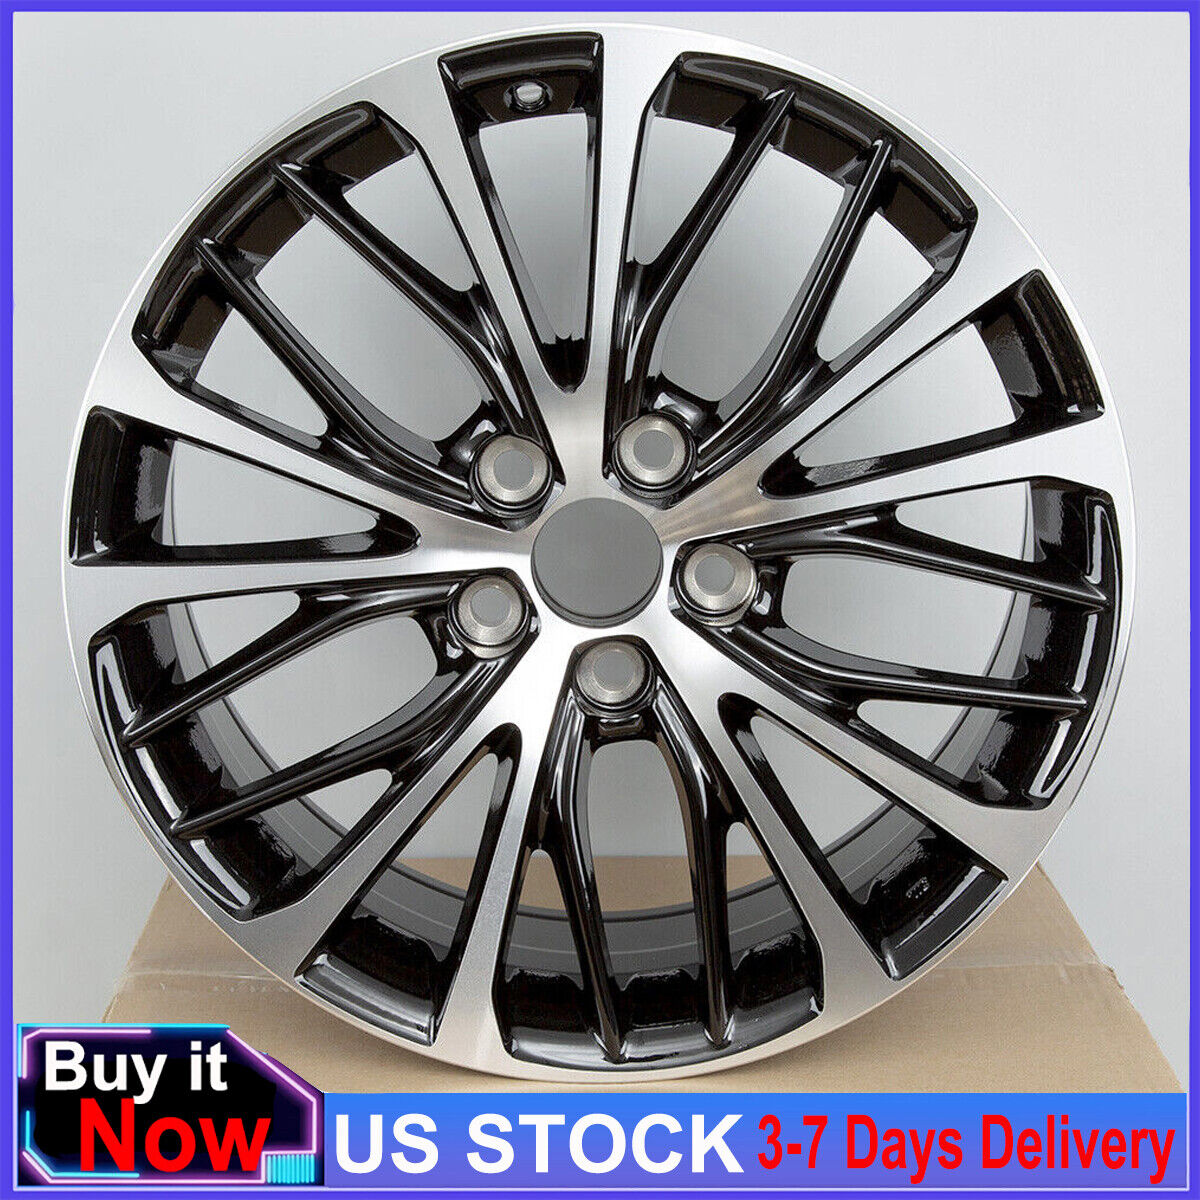 New 18 in Replacement Rim for Toyota Camry SE Hybrid 2018-2020 Wheel OEM Quality